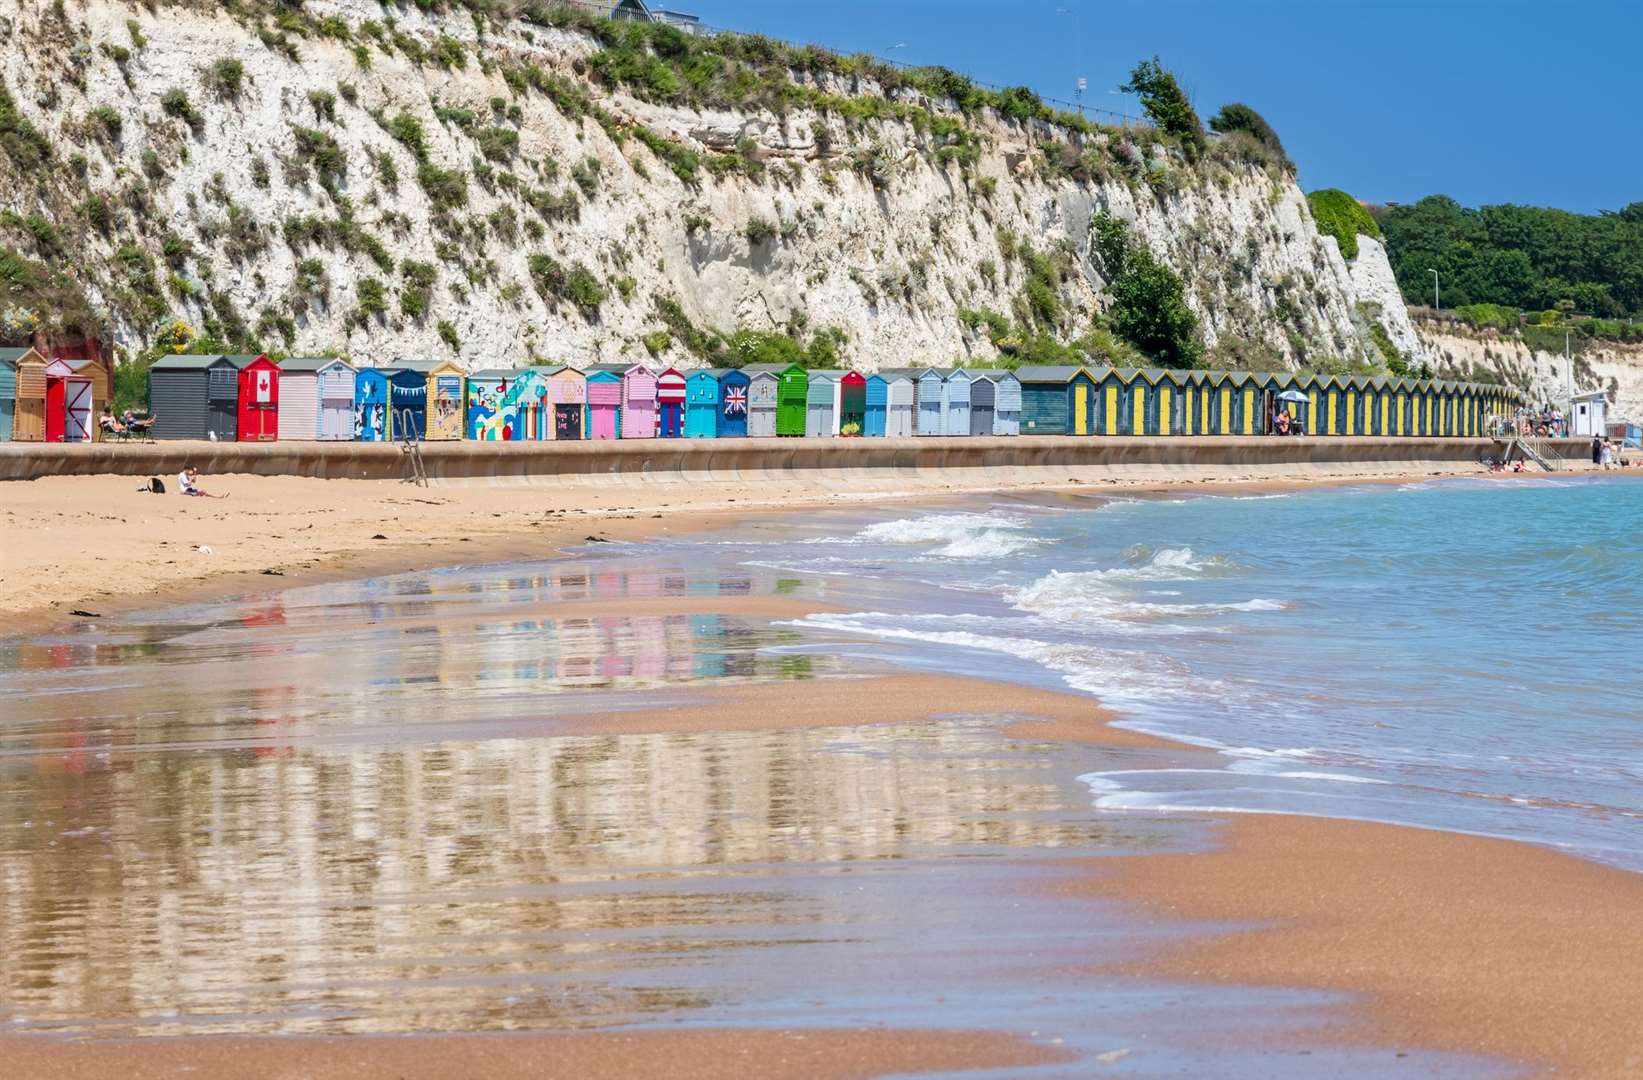 Stone Bay in the seaside town of Broadstairs made The Times’ best beaches list